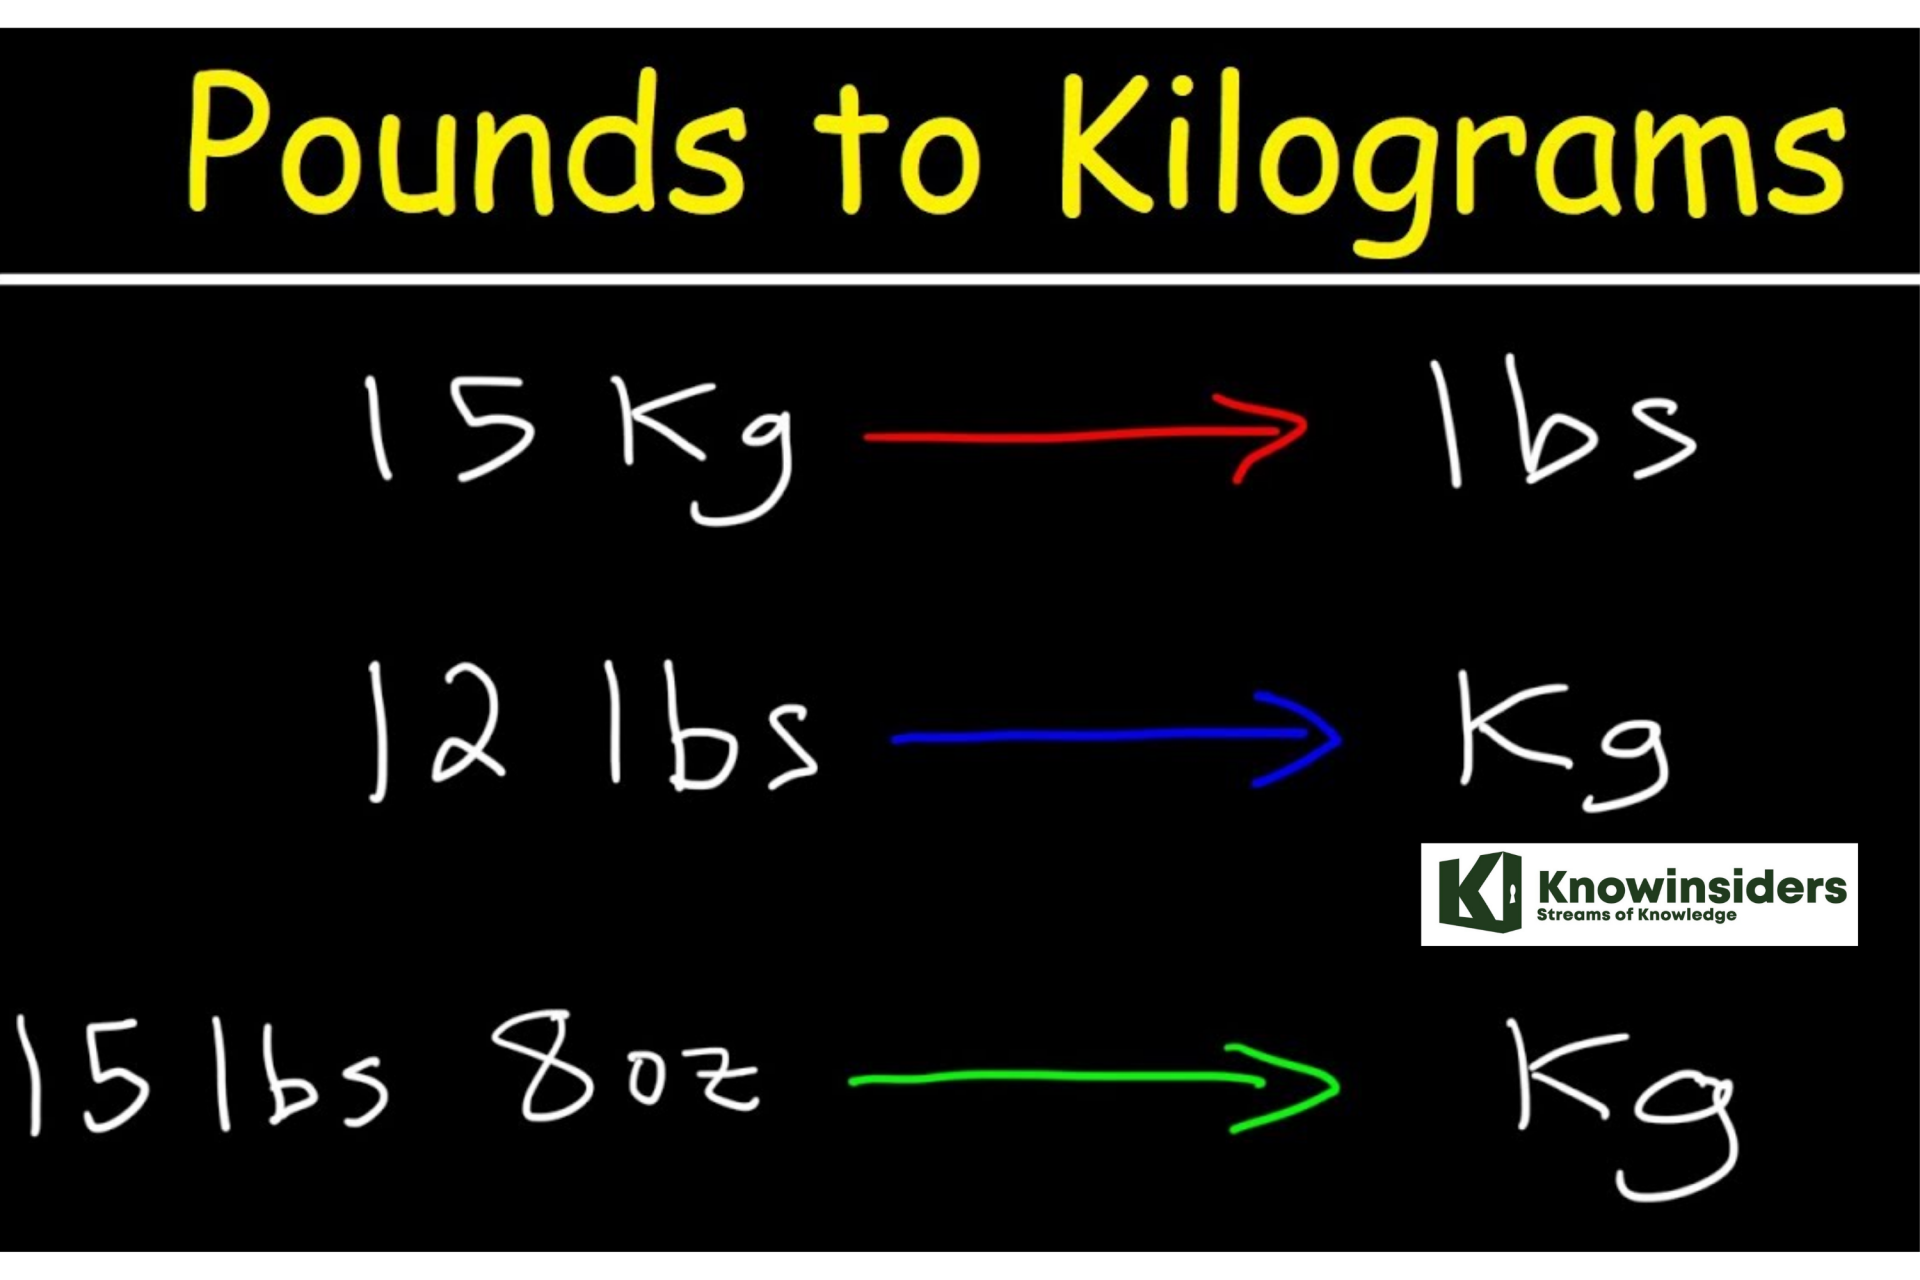 How to Convert Pounds to Kilograms